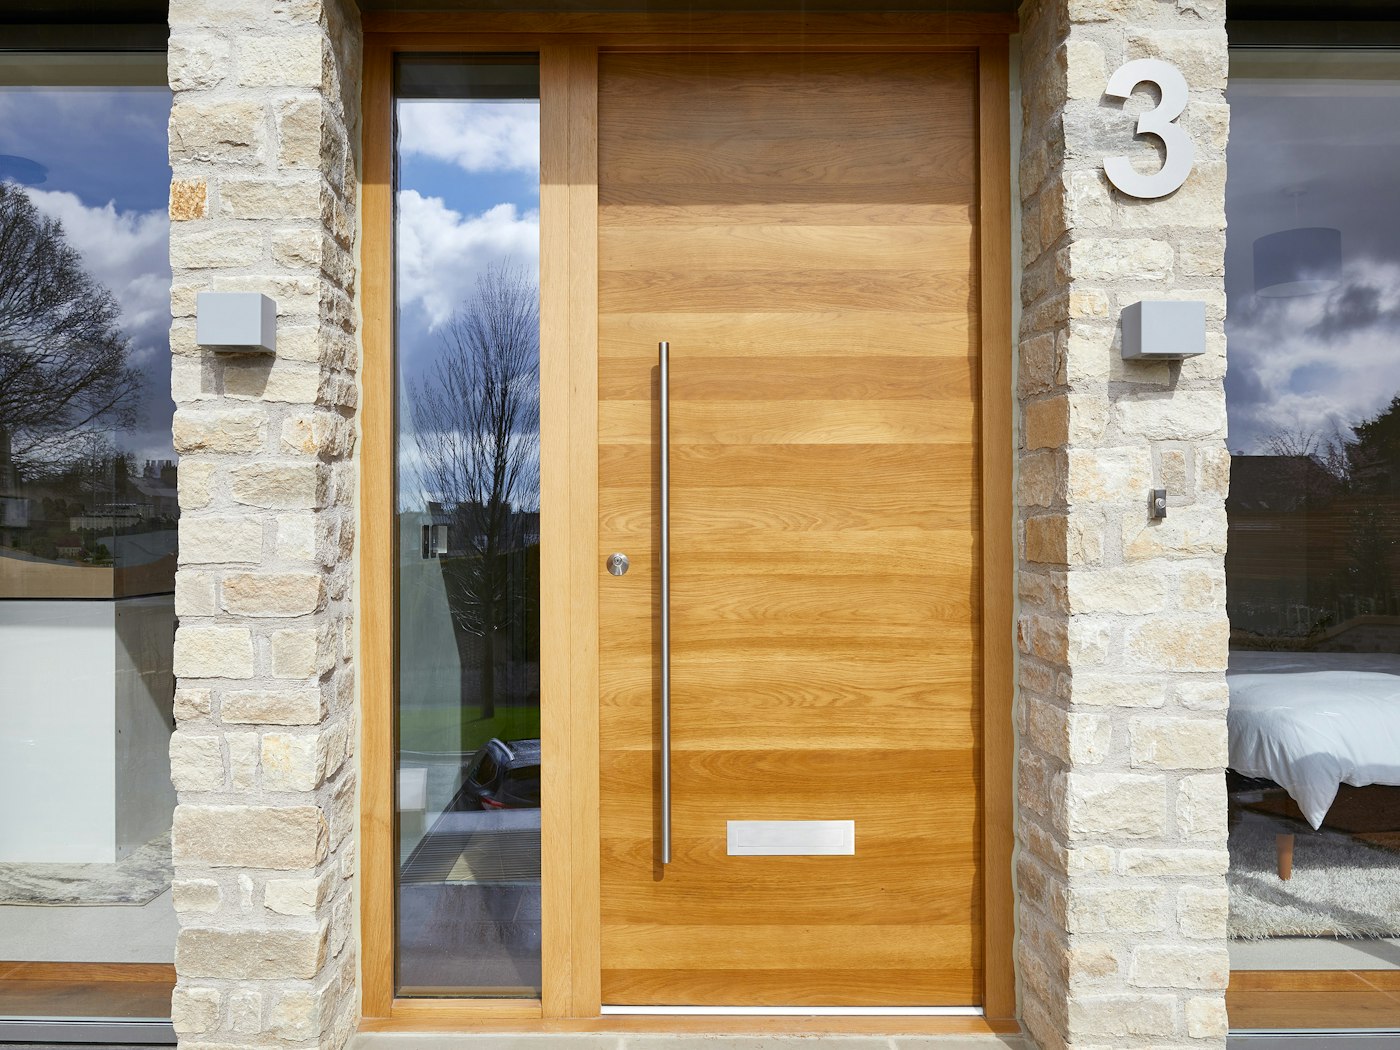 Using a large door number by a simple door creates interest